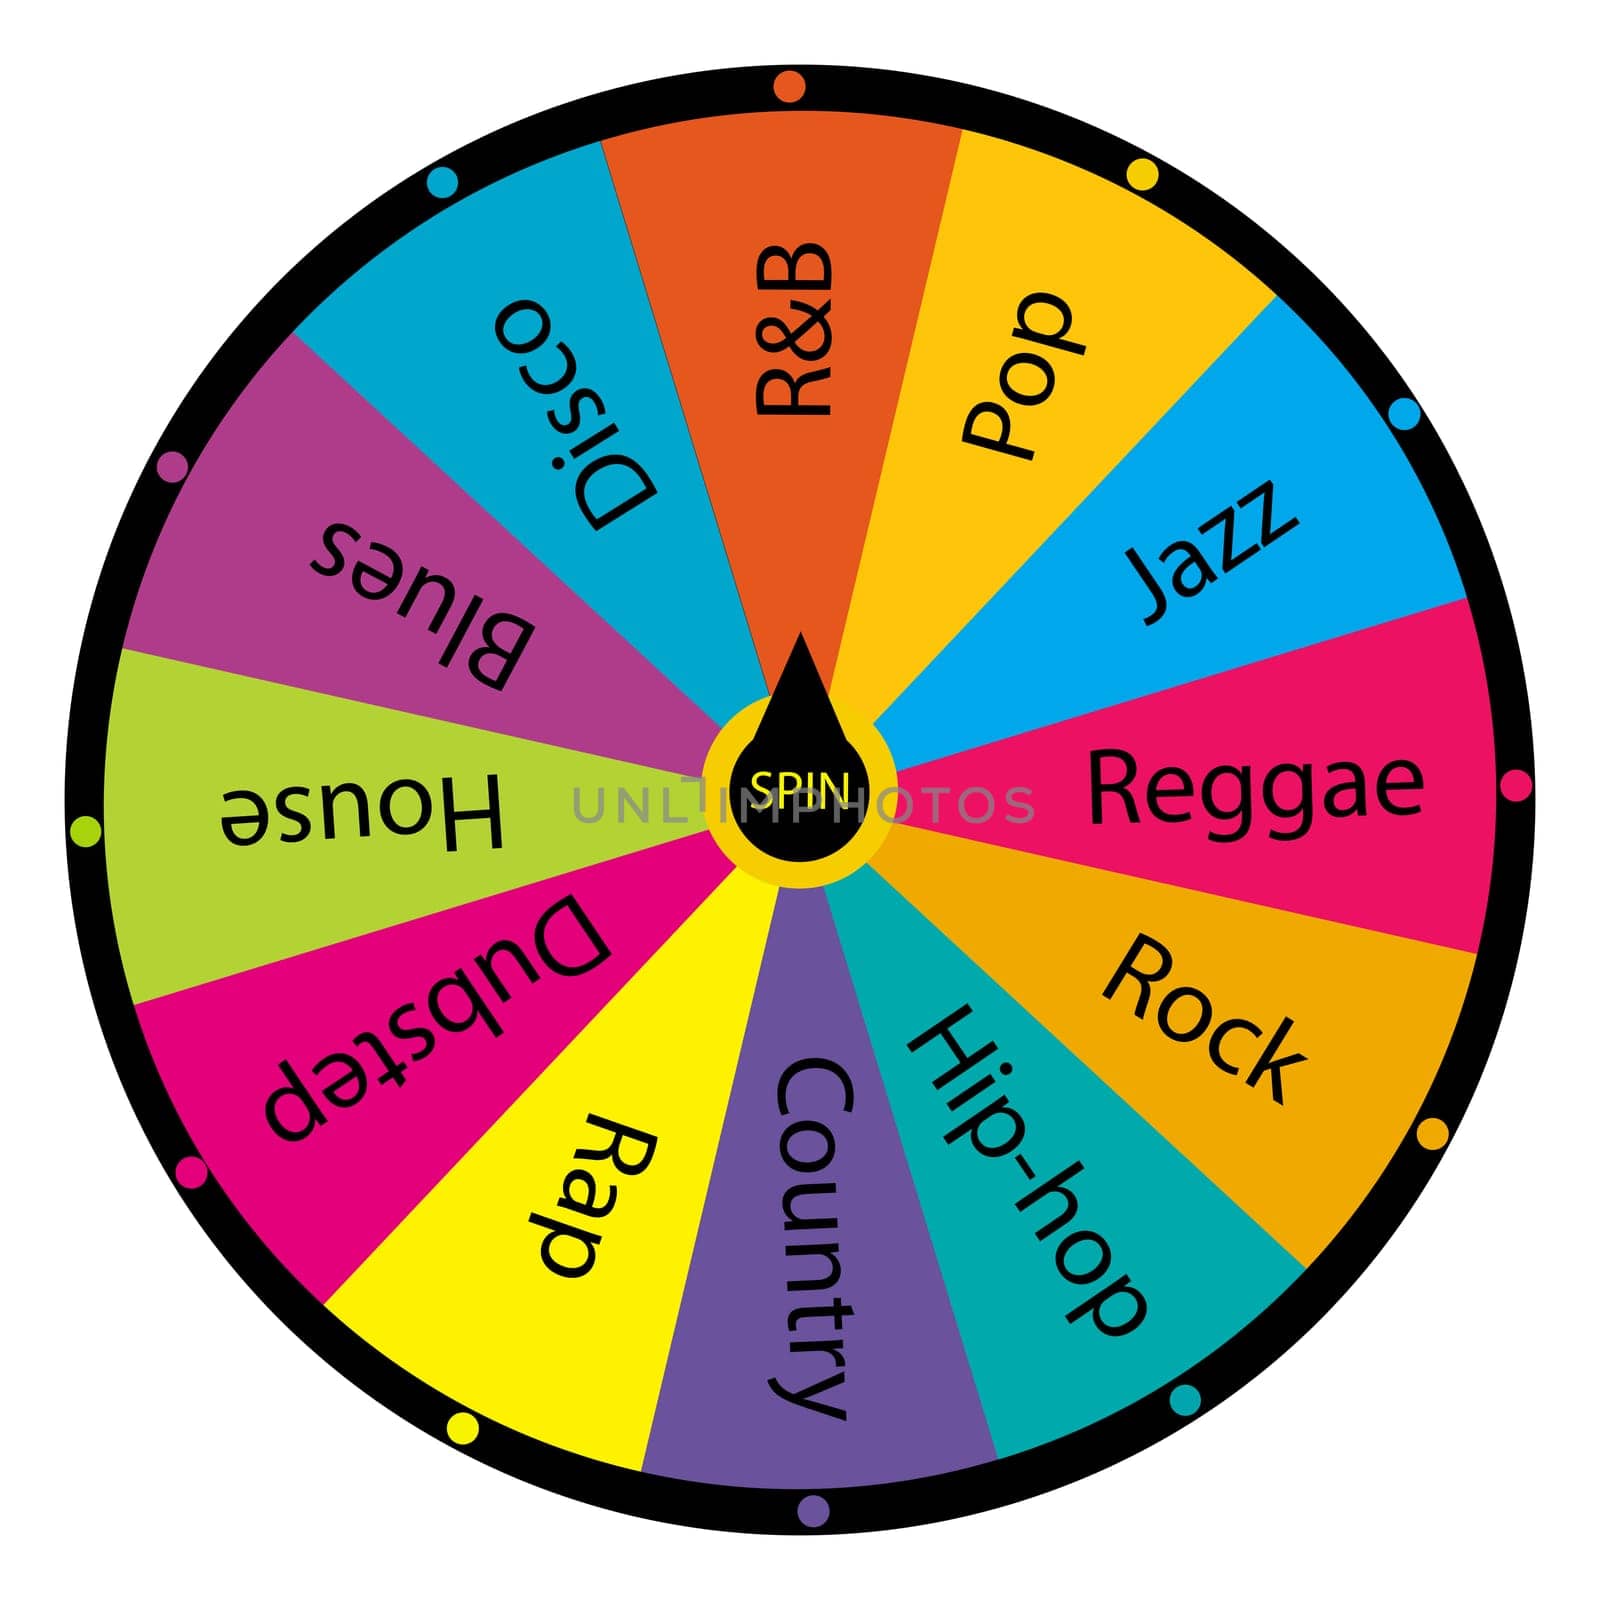 Wheel of fortune with Music genre options by hibrida13